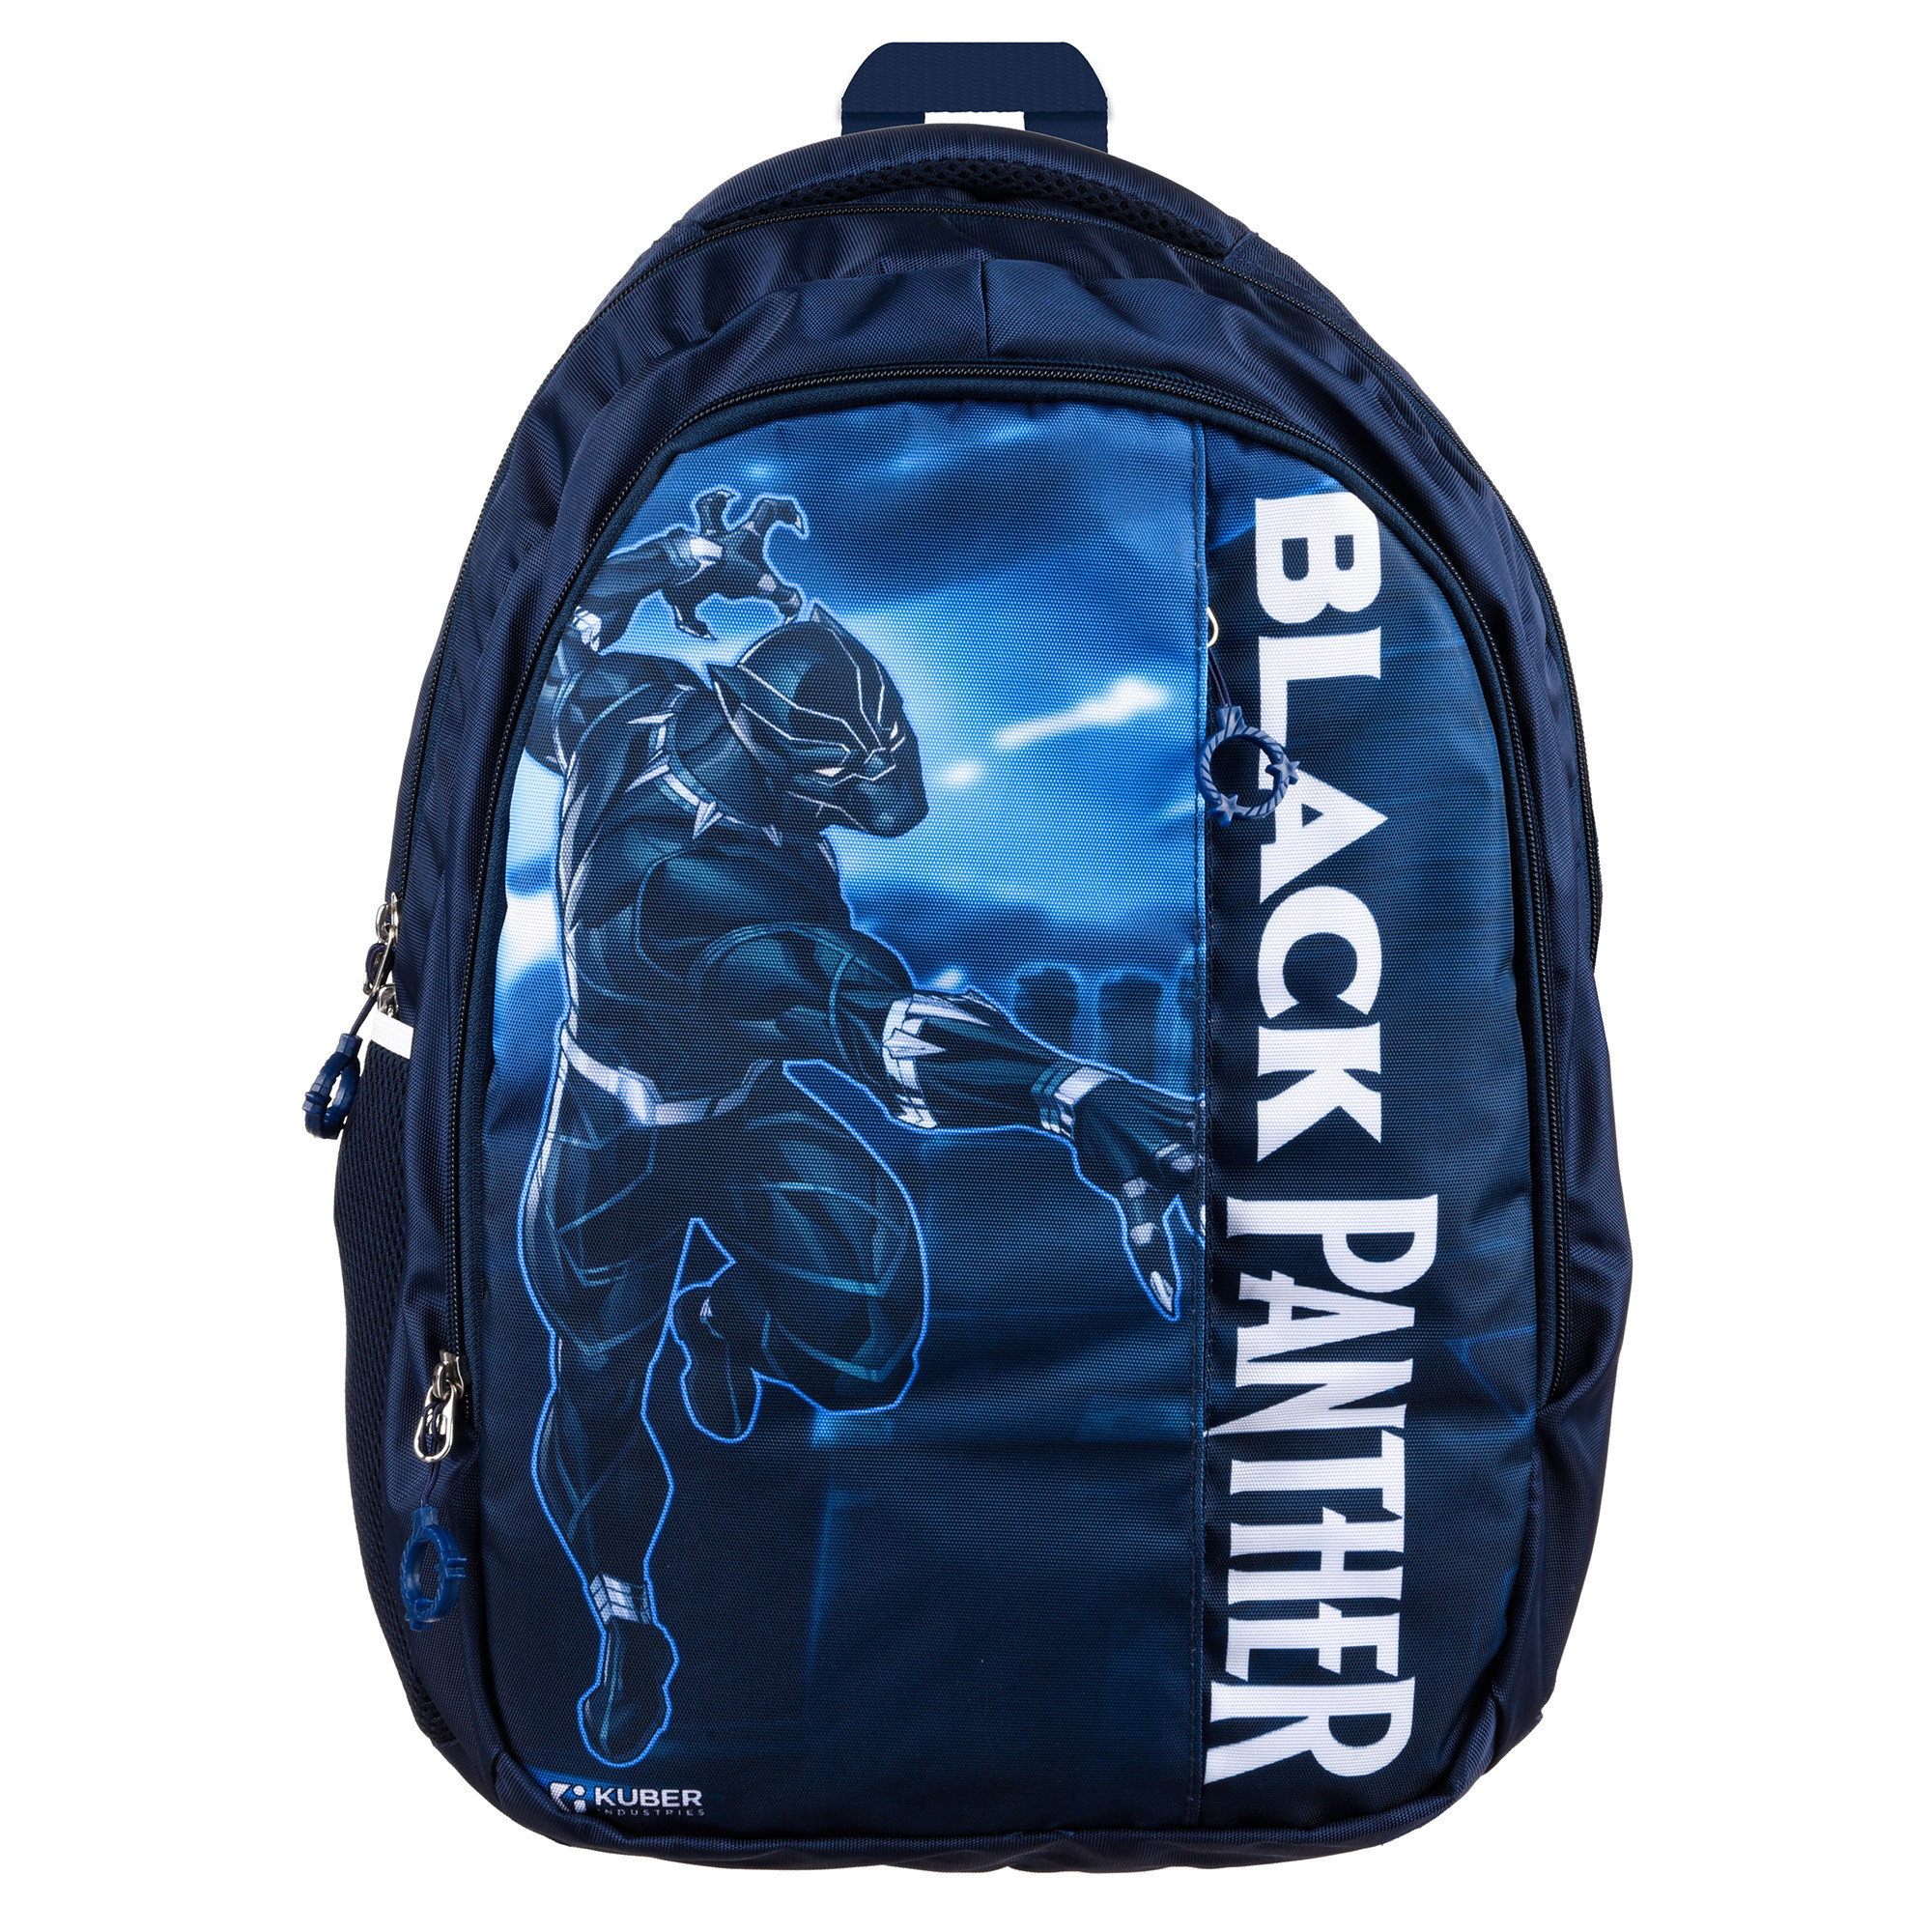 Kuber Industries Marvel Black Panther School Bags | Kids School Bags | Collage Bookbag | Travel Backpack | School Bag for Girls & Boys | School Bag with 5 Compartments | Include Bag Cover | Blue